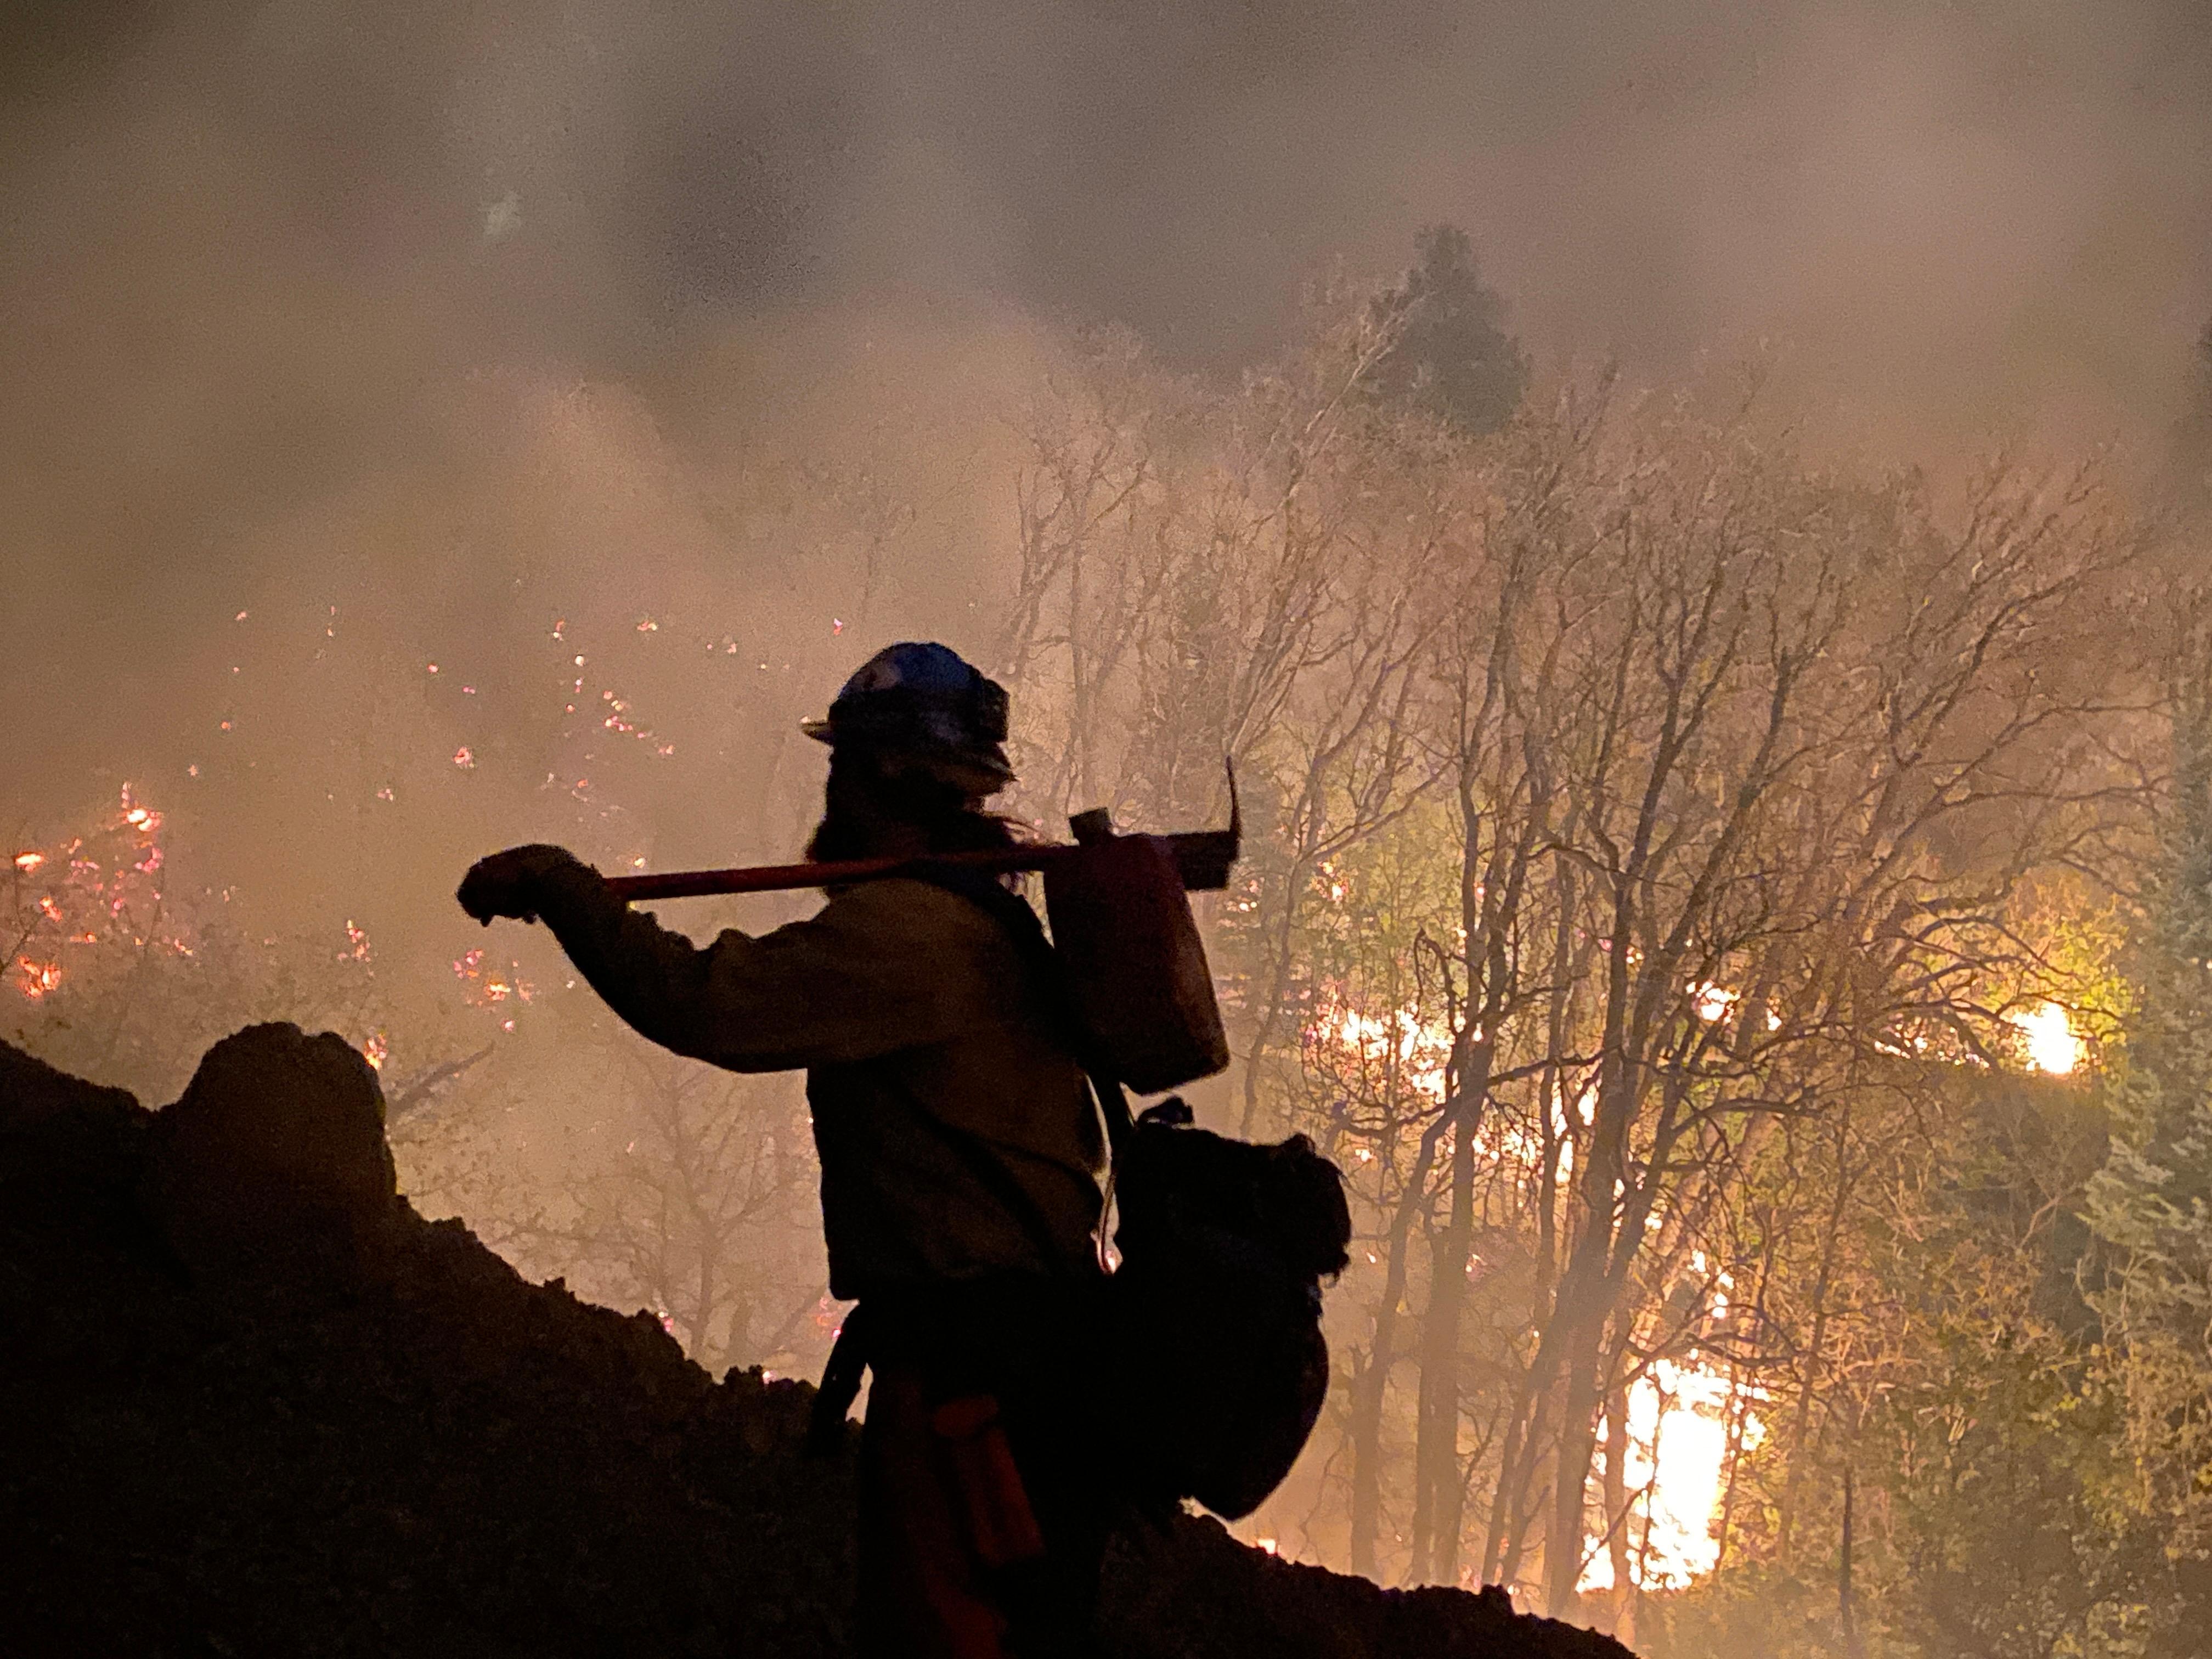 Firefighter watching for any embers across the line during a tactical firing operation at night on 4/26/22 Photo Credit: Angela Goldman, CAIMT4 PIO